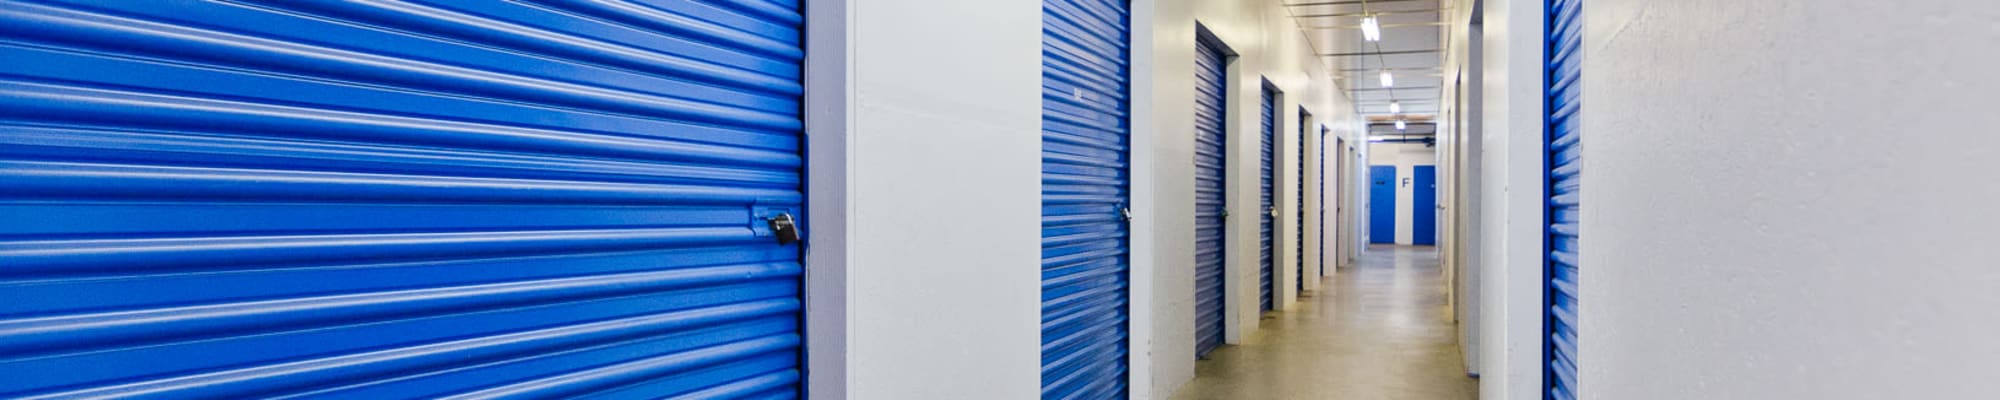 About Us at A-American Self Storage in Los Angeles, California